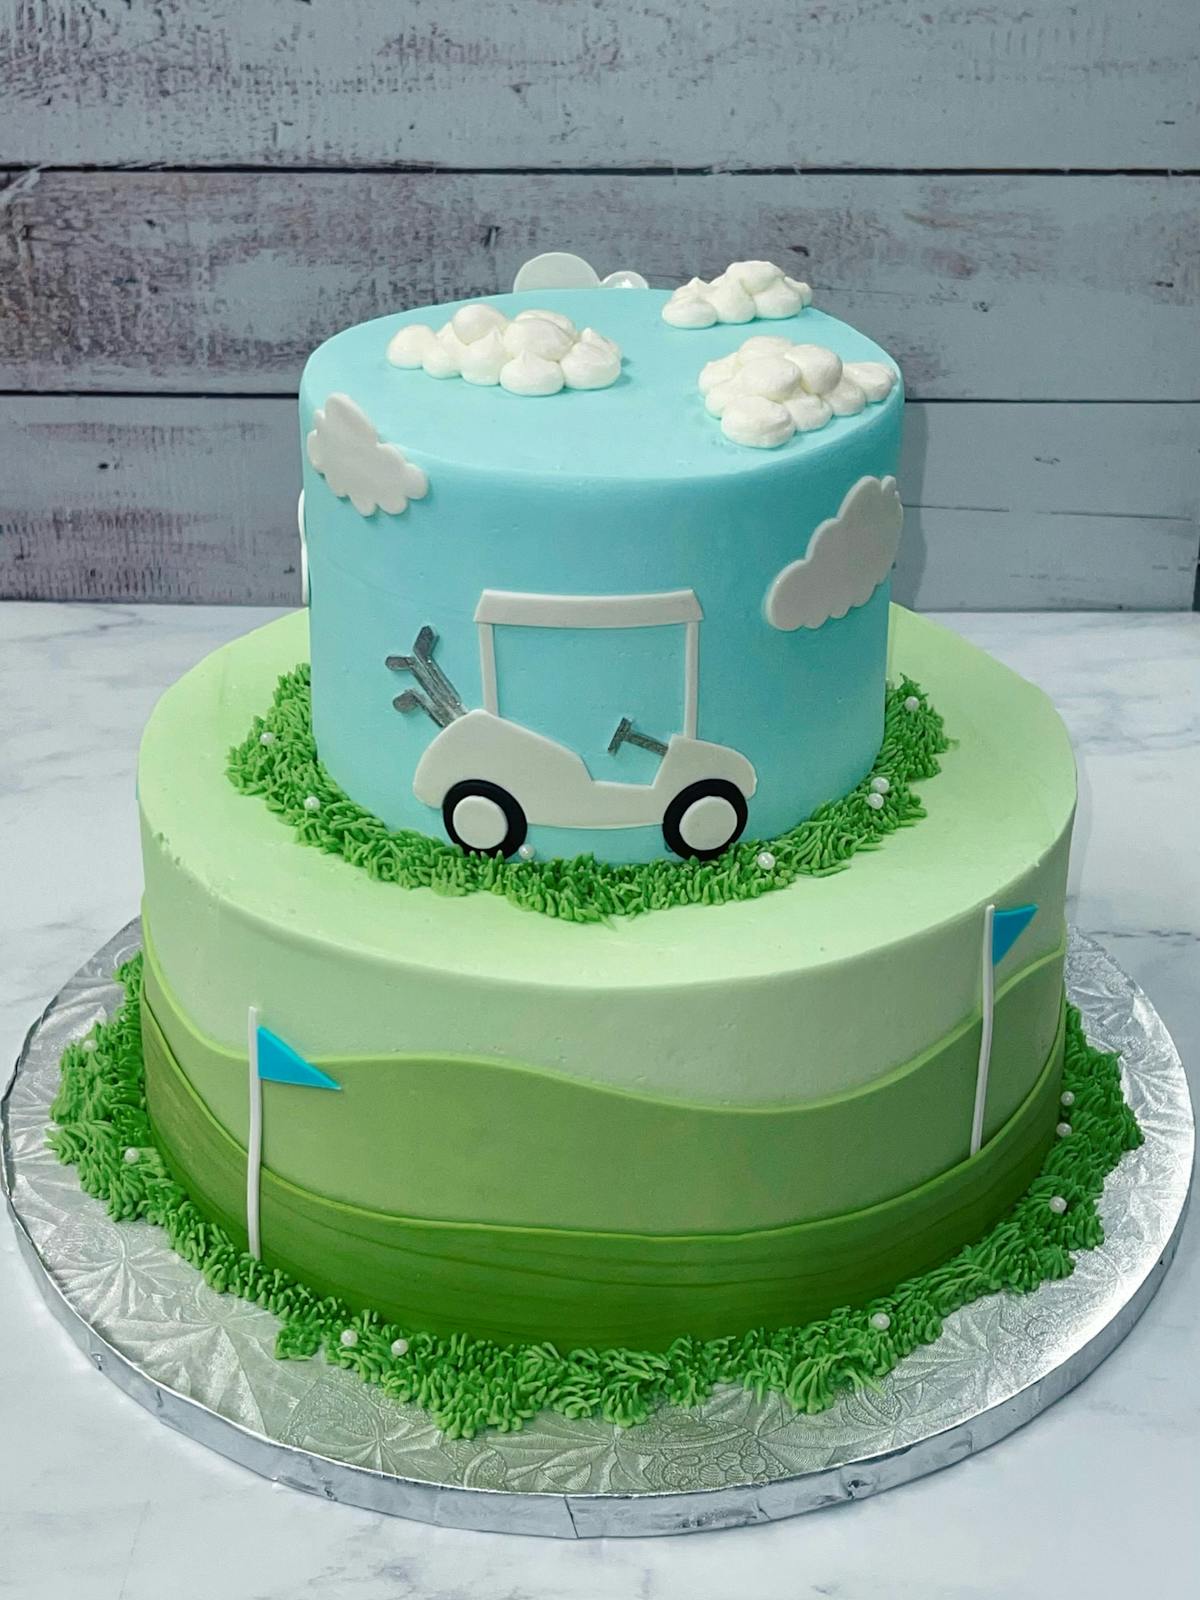 a cake with cars decoration